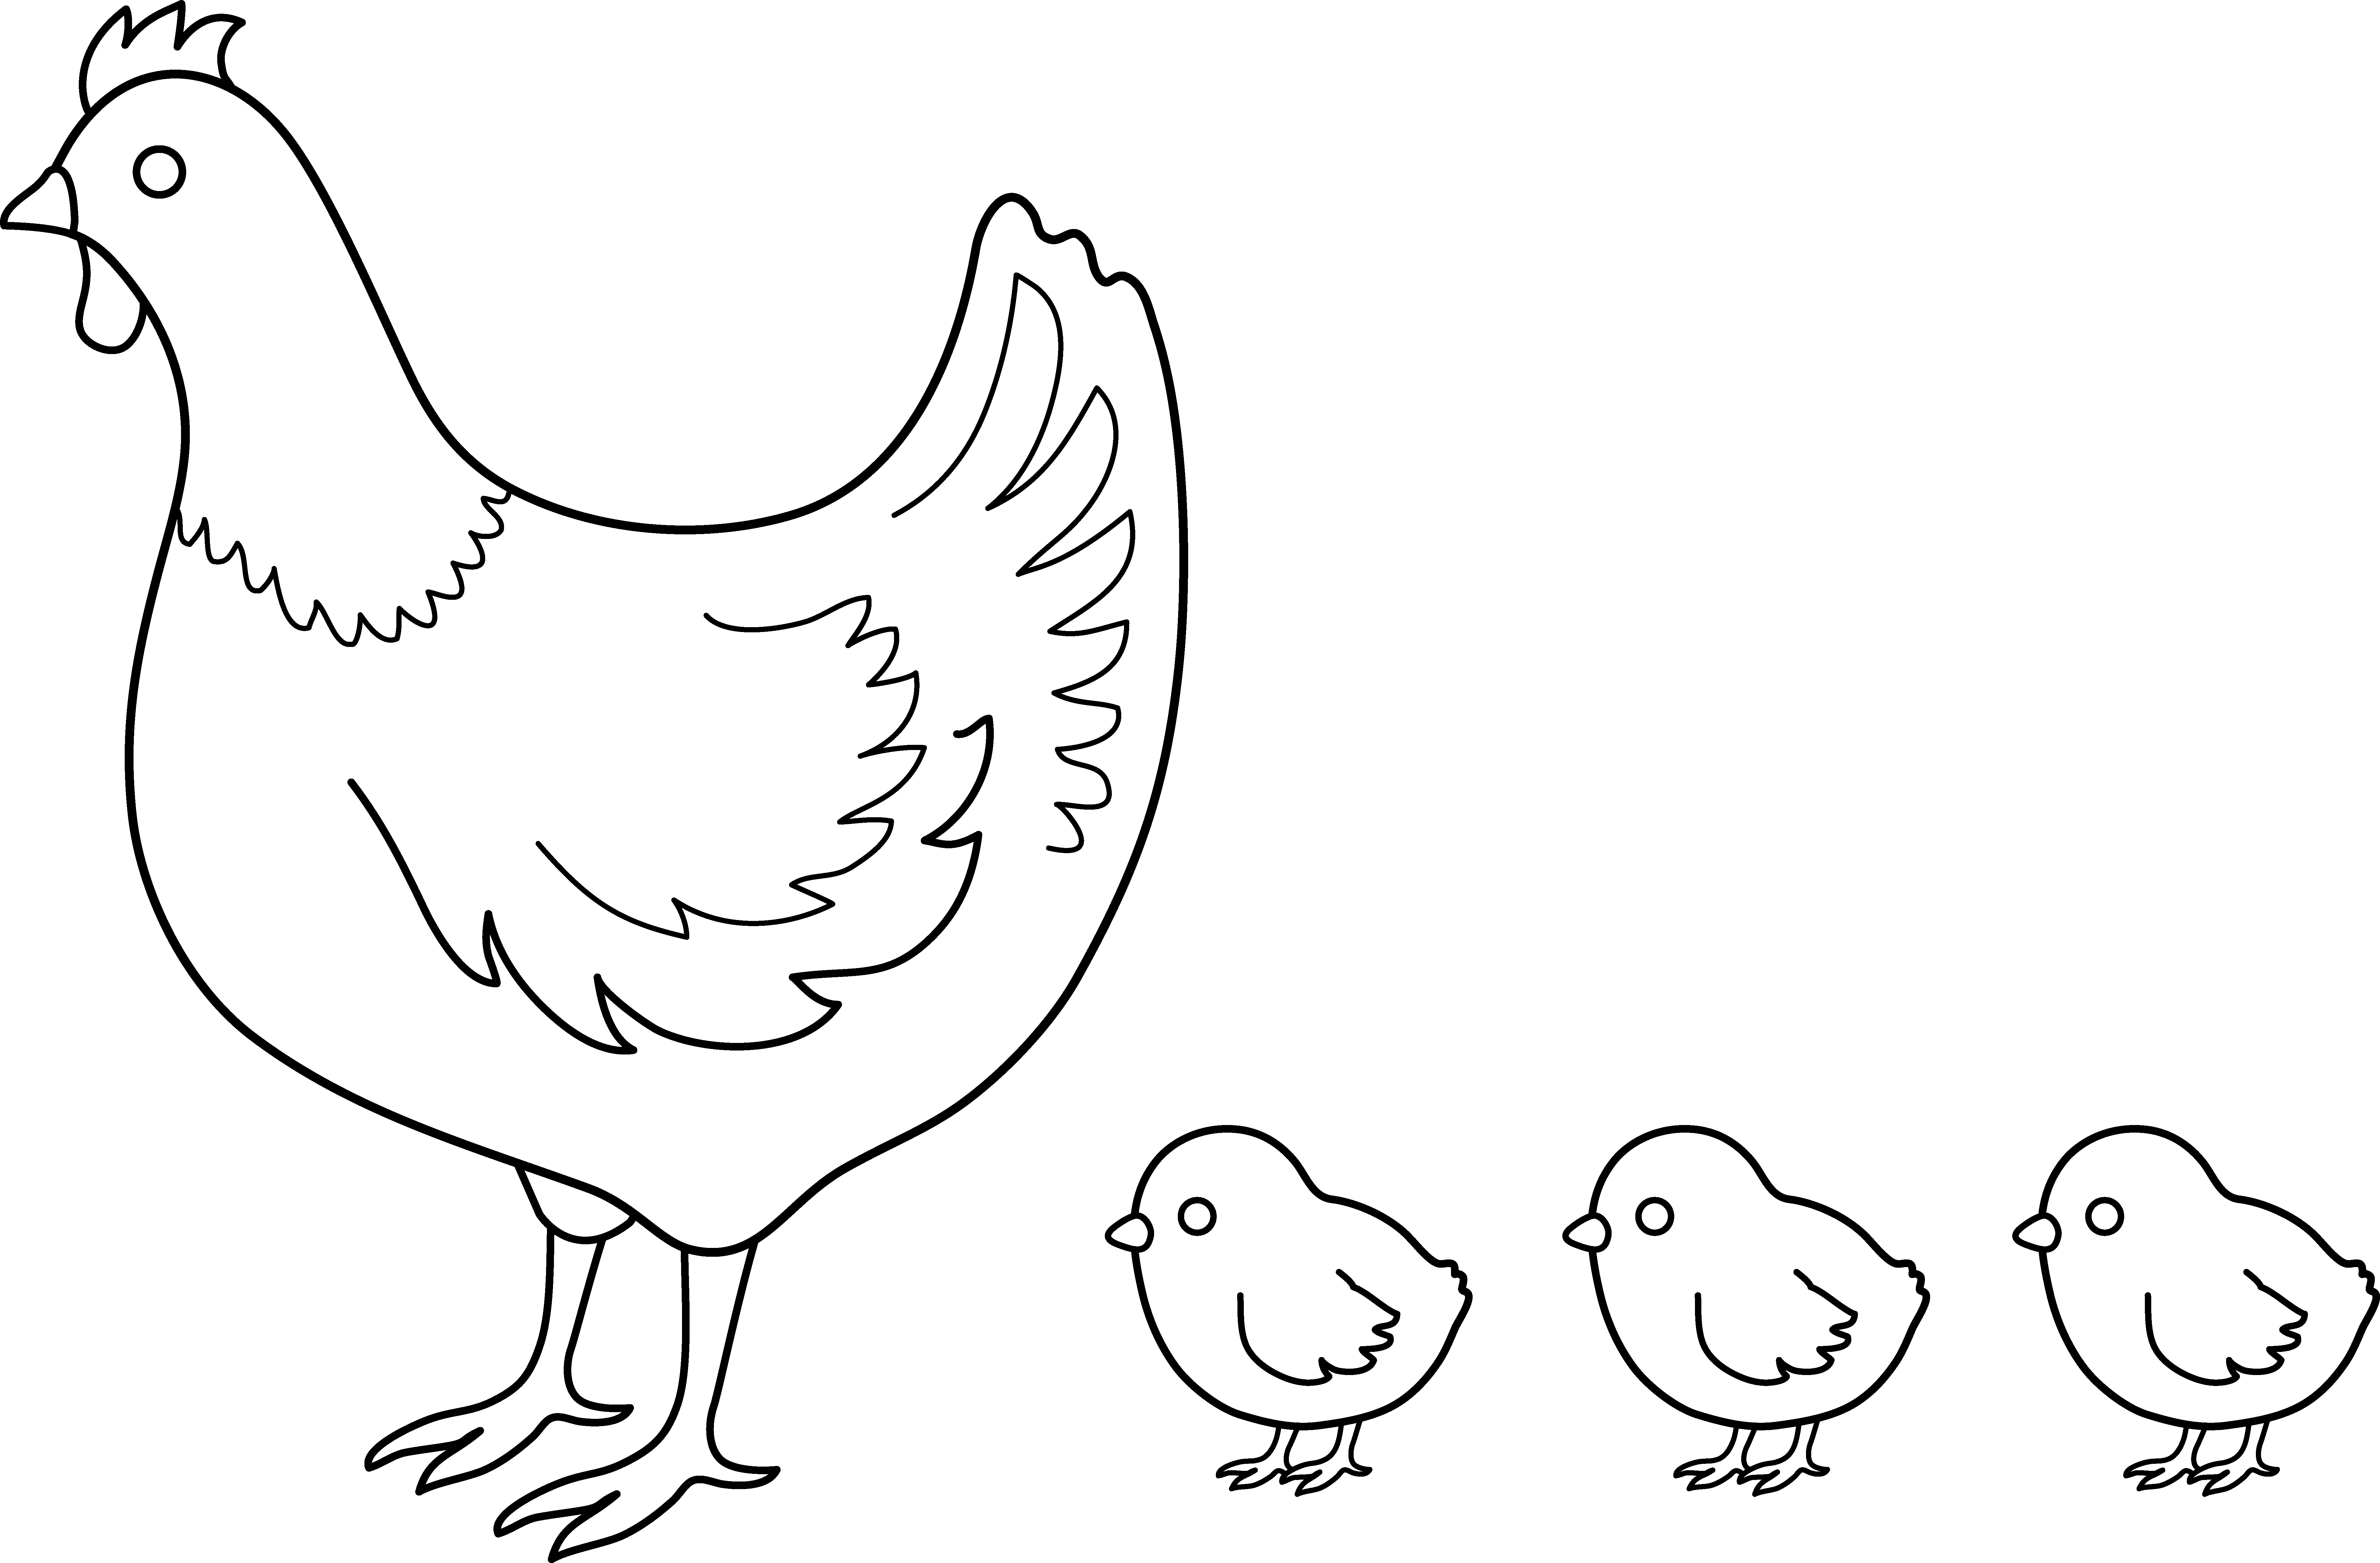 Comb clipart coloring page. Hen and chicks free